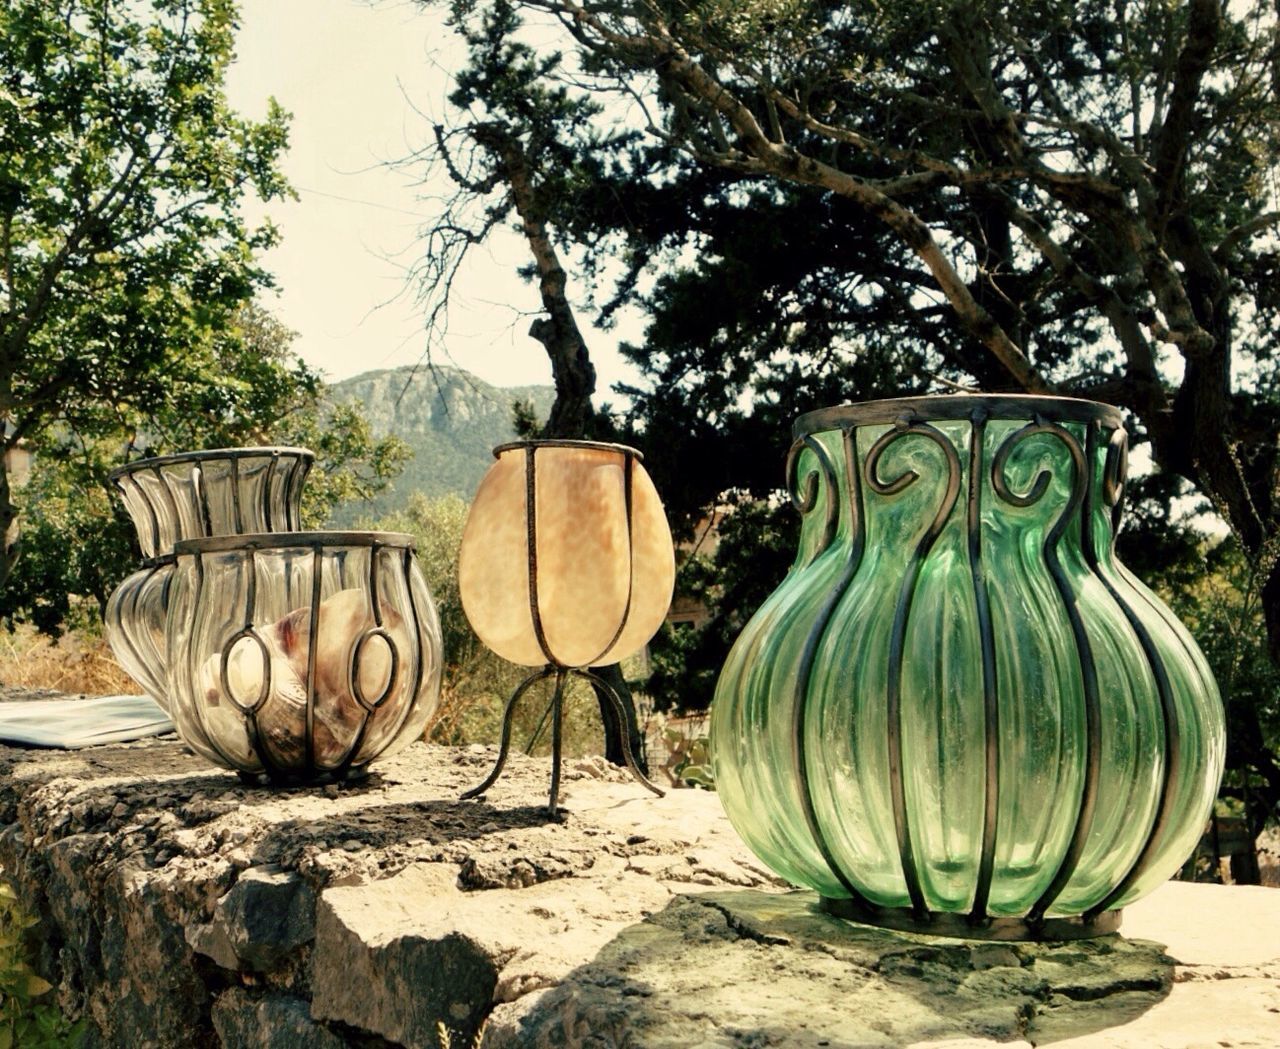 Close-up of glass jars on stone wall against trees